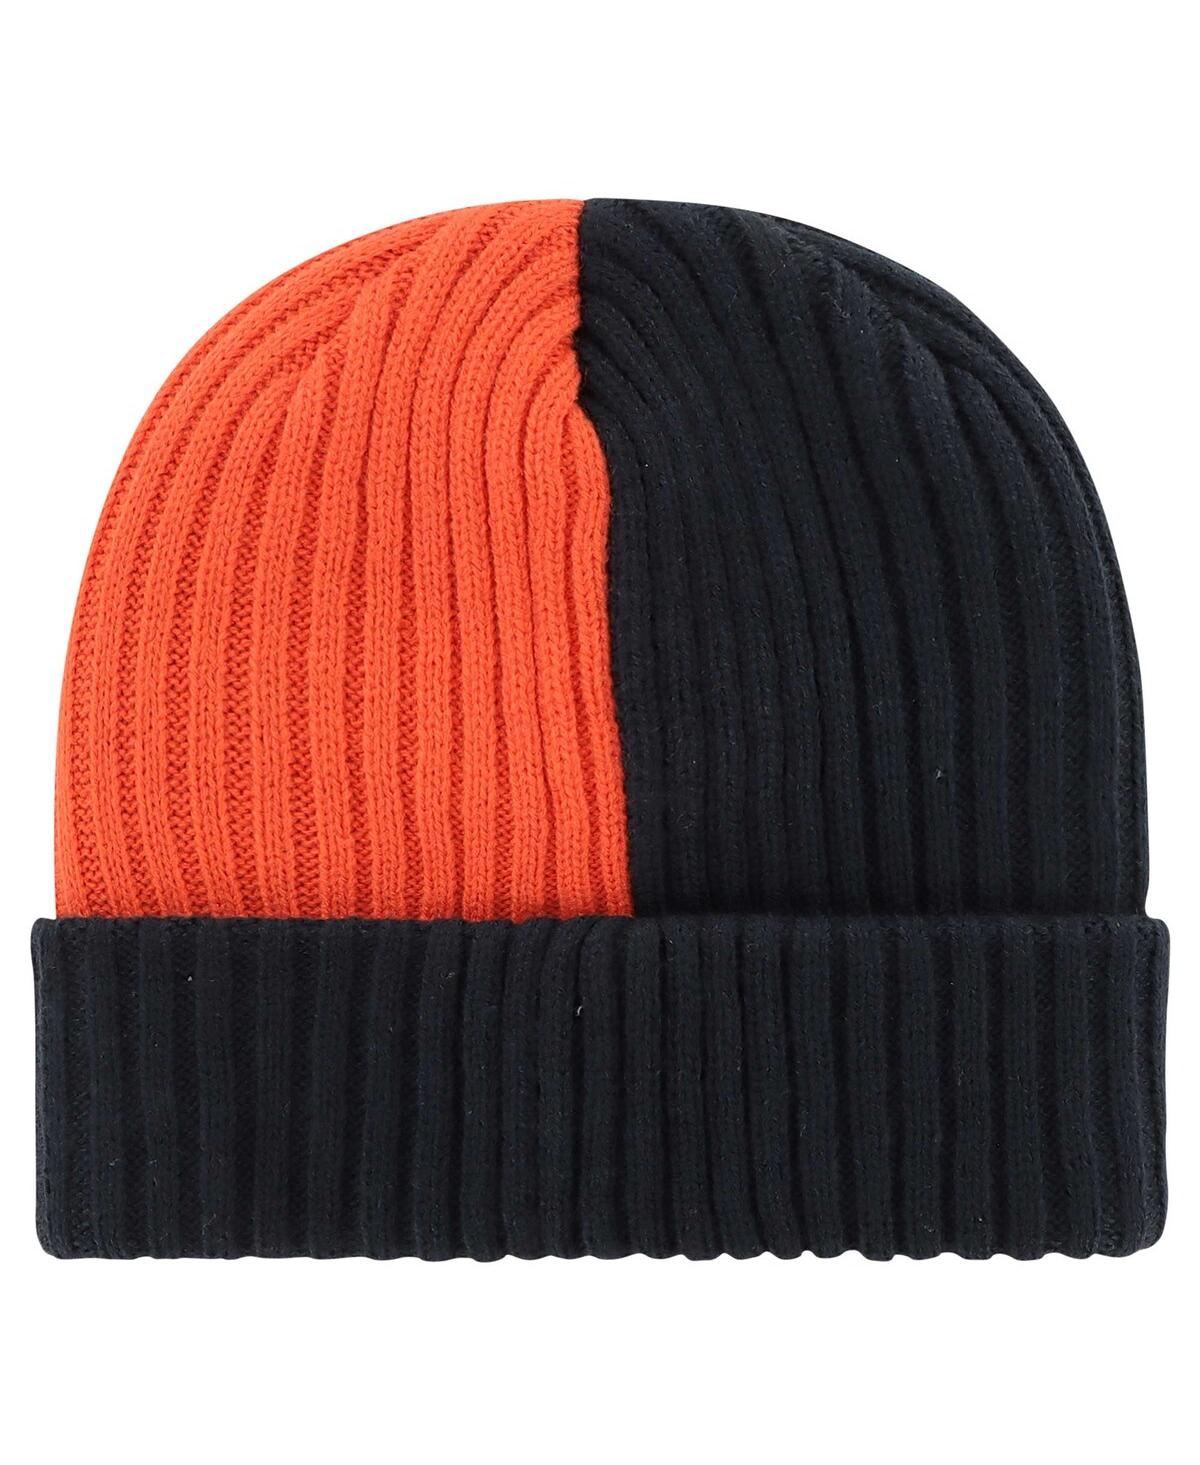 Shop 47 Brand Men's ' Navy Chicago Bears Fracture Cuffed Knit Hat